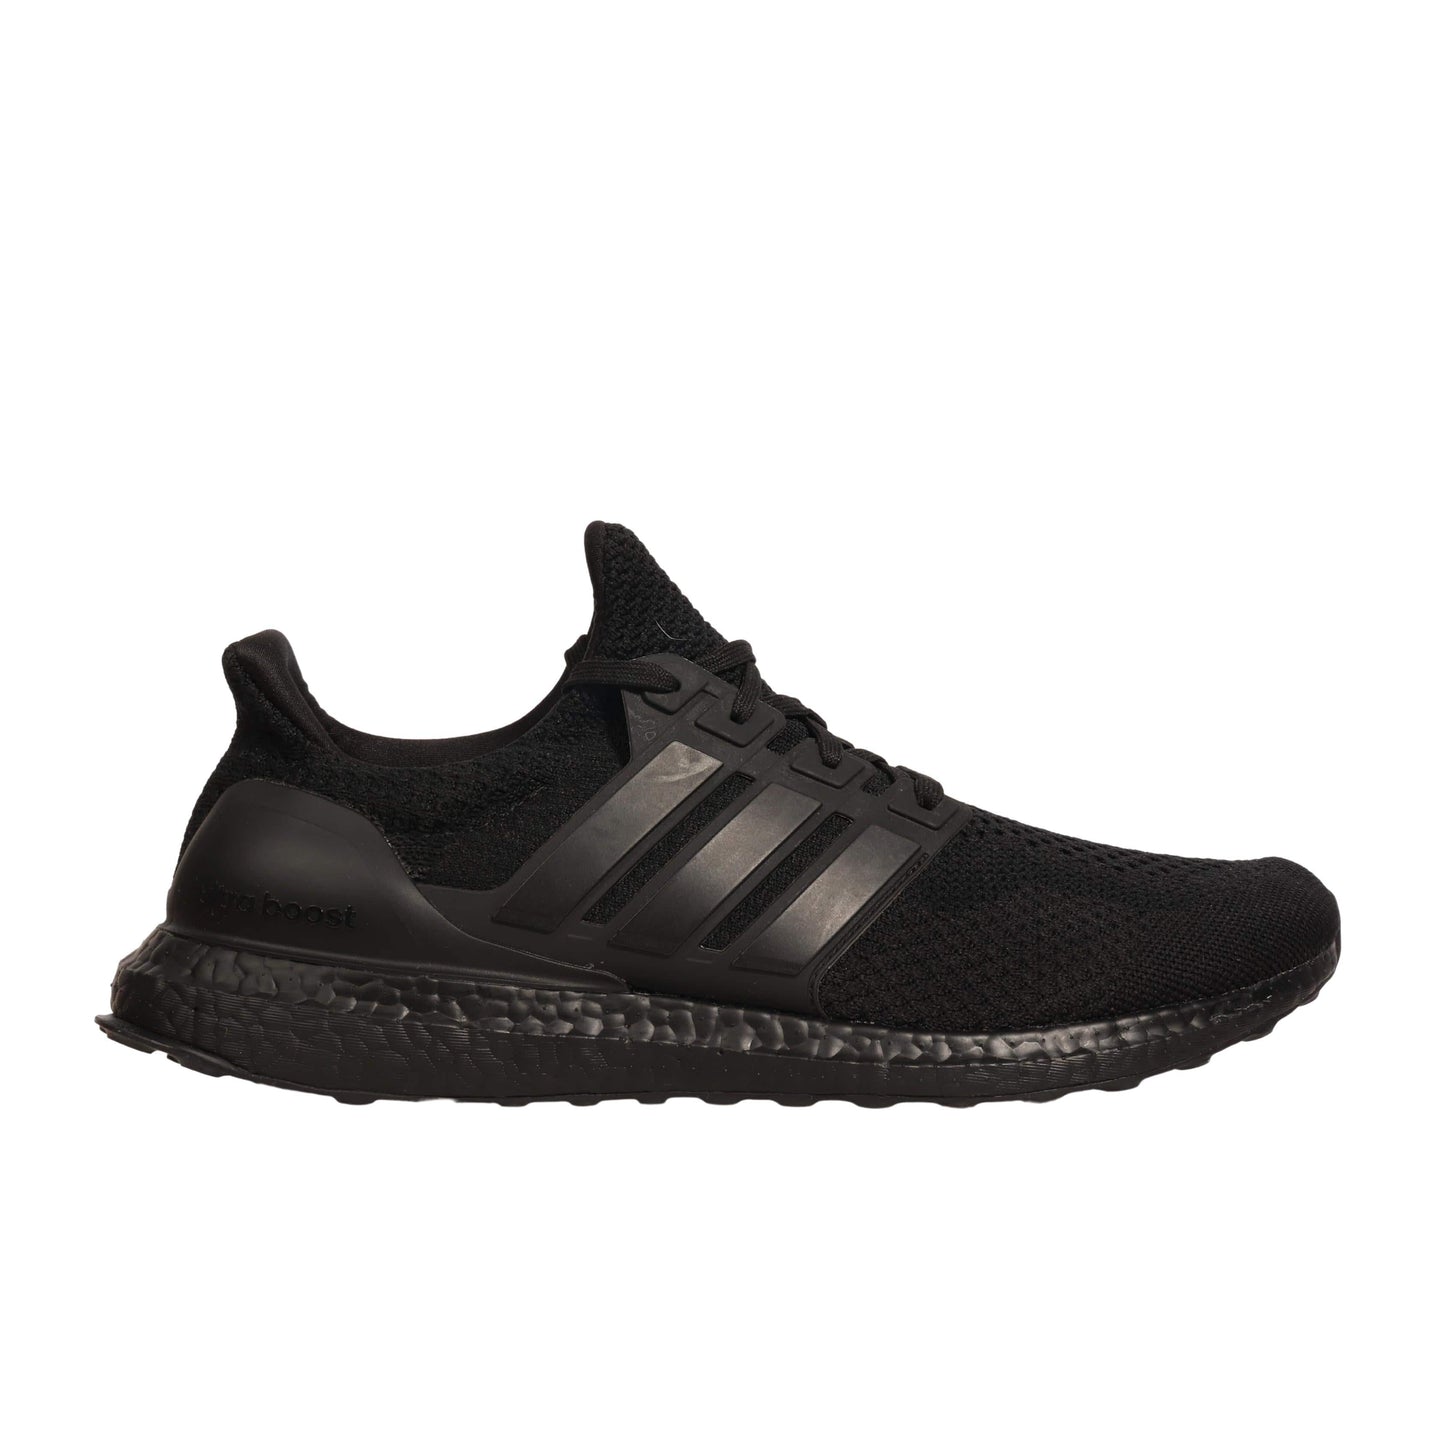 ADIDAS Athletic Shoes 46.5 / Black ADIDAS - ULTRABOOST 5 DNA SHOES